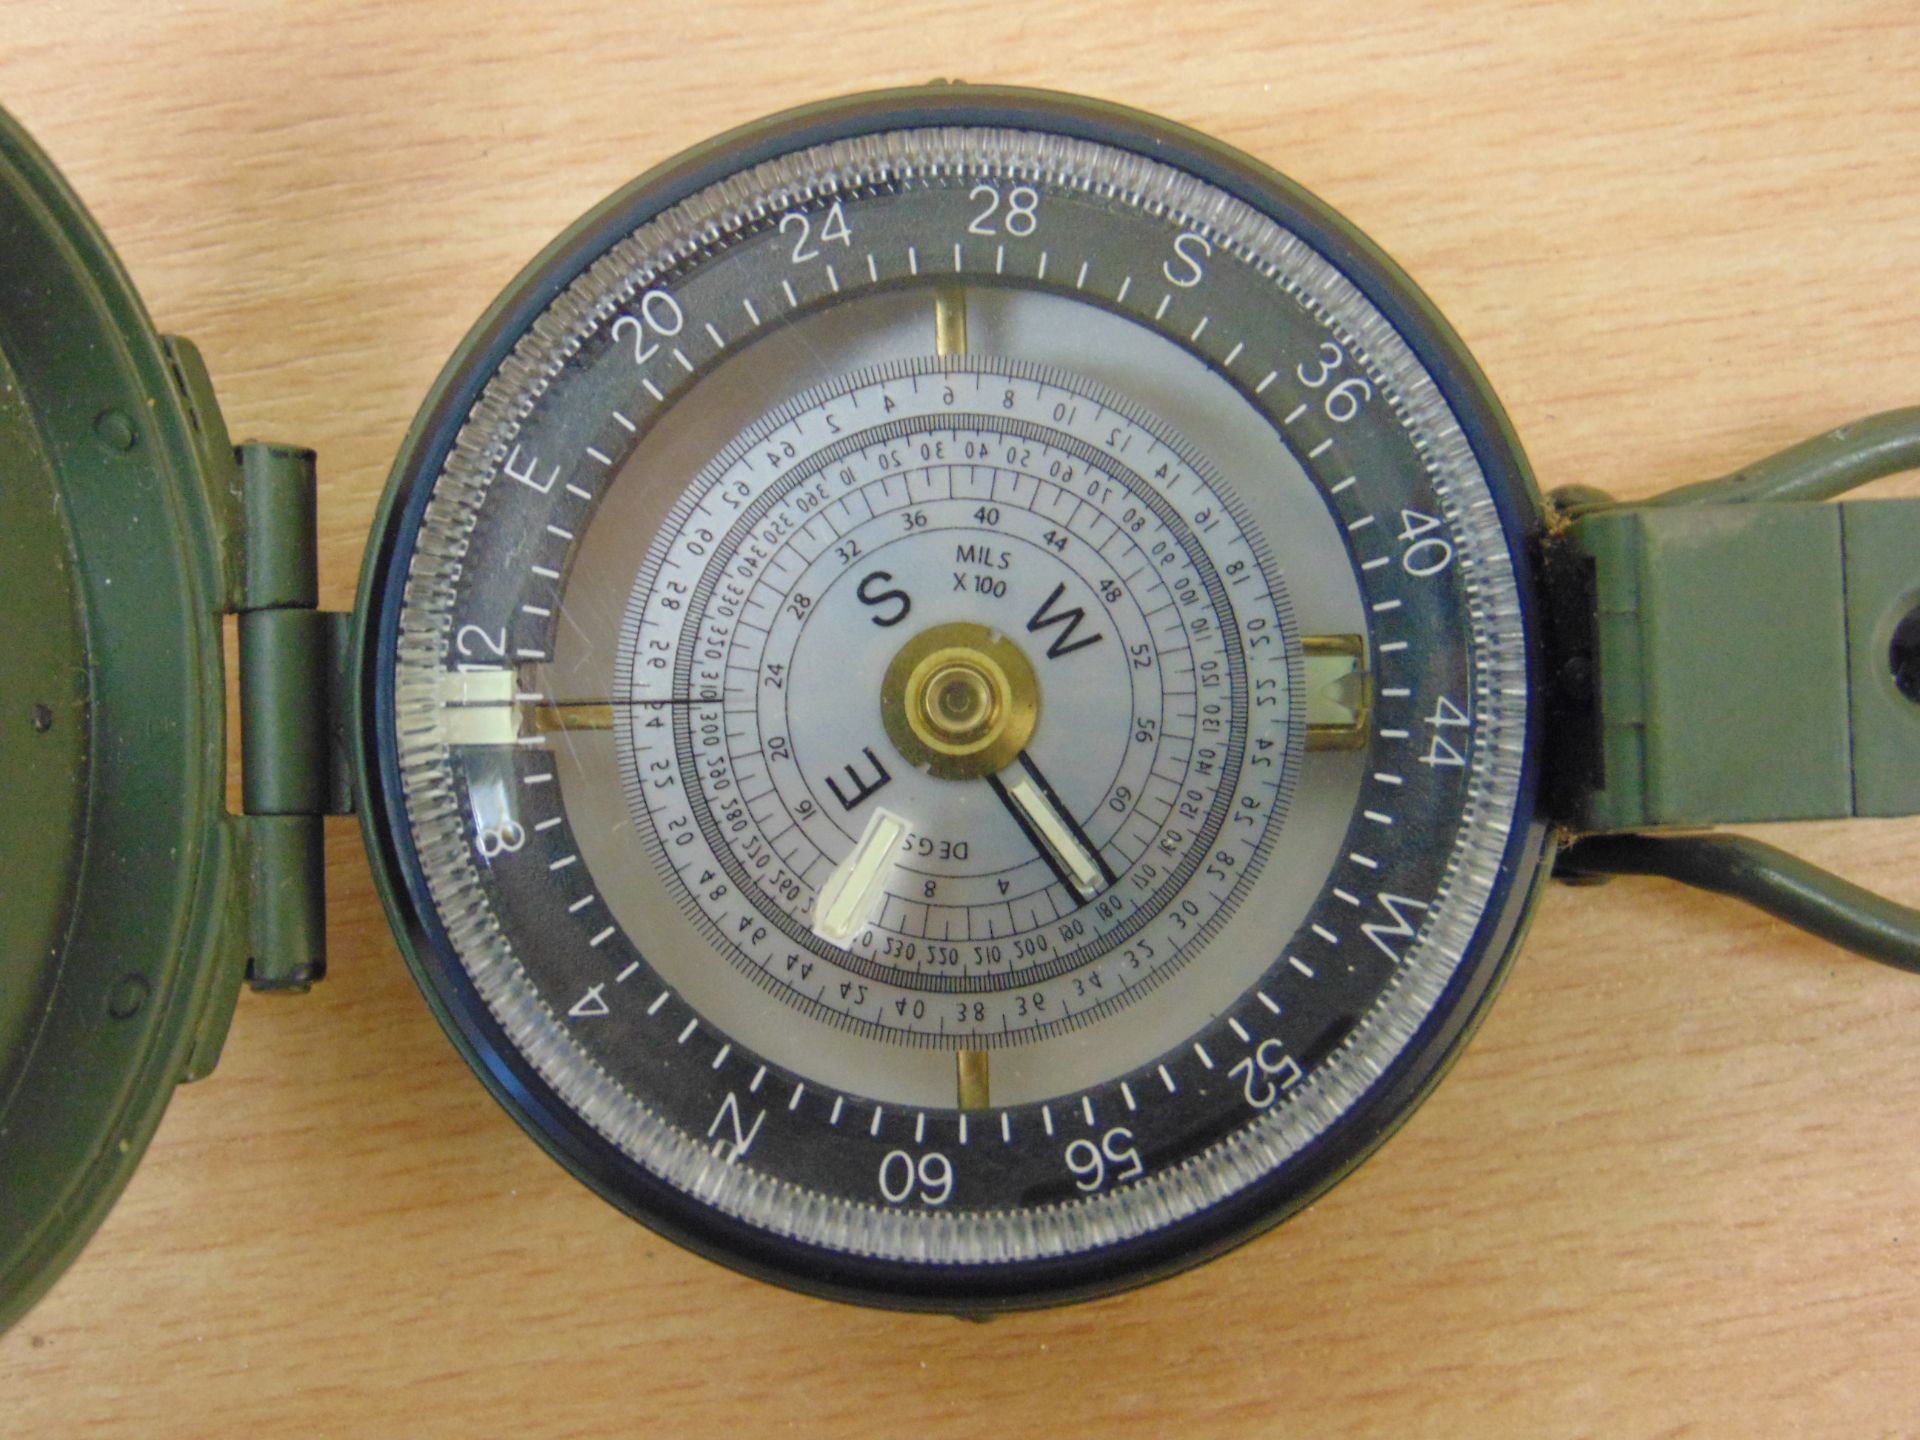 FRANCIS BARKER M88 PRISMATIC COMPASS NATO MARKS BRITISH ARMY ISSUED - Image 3 of 6